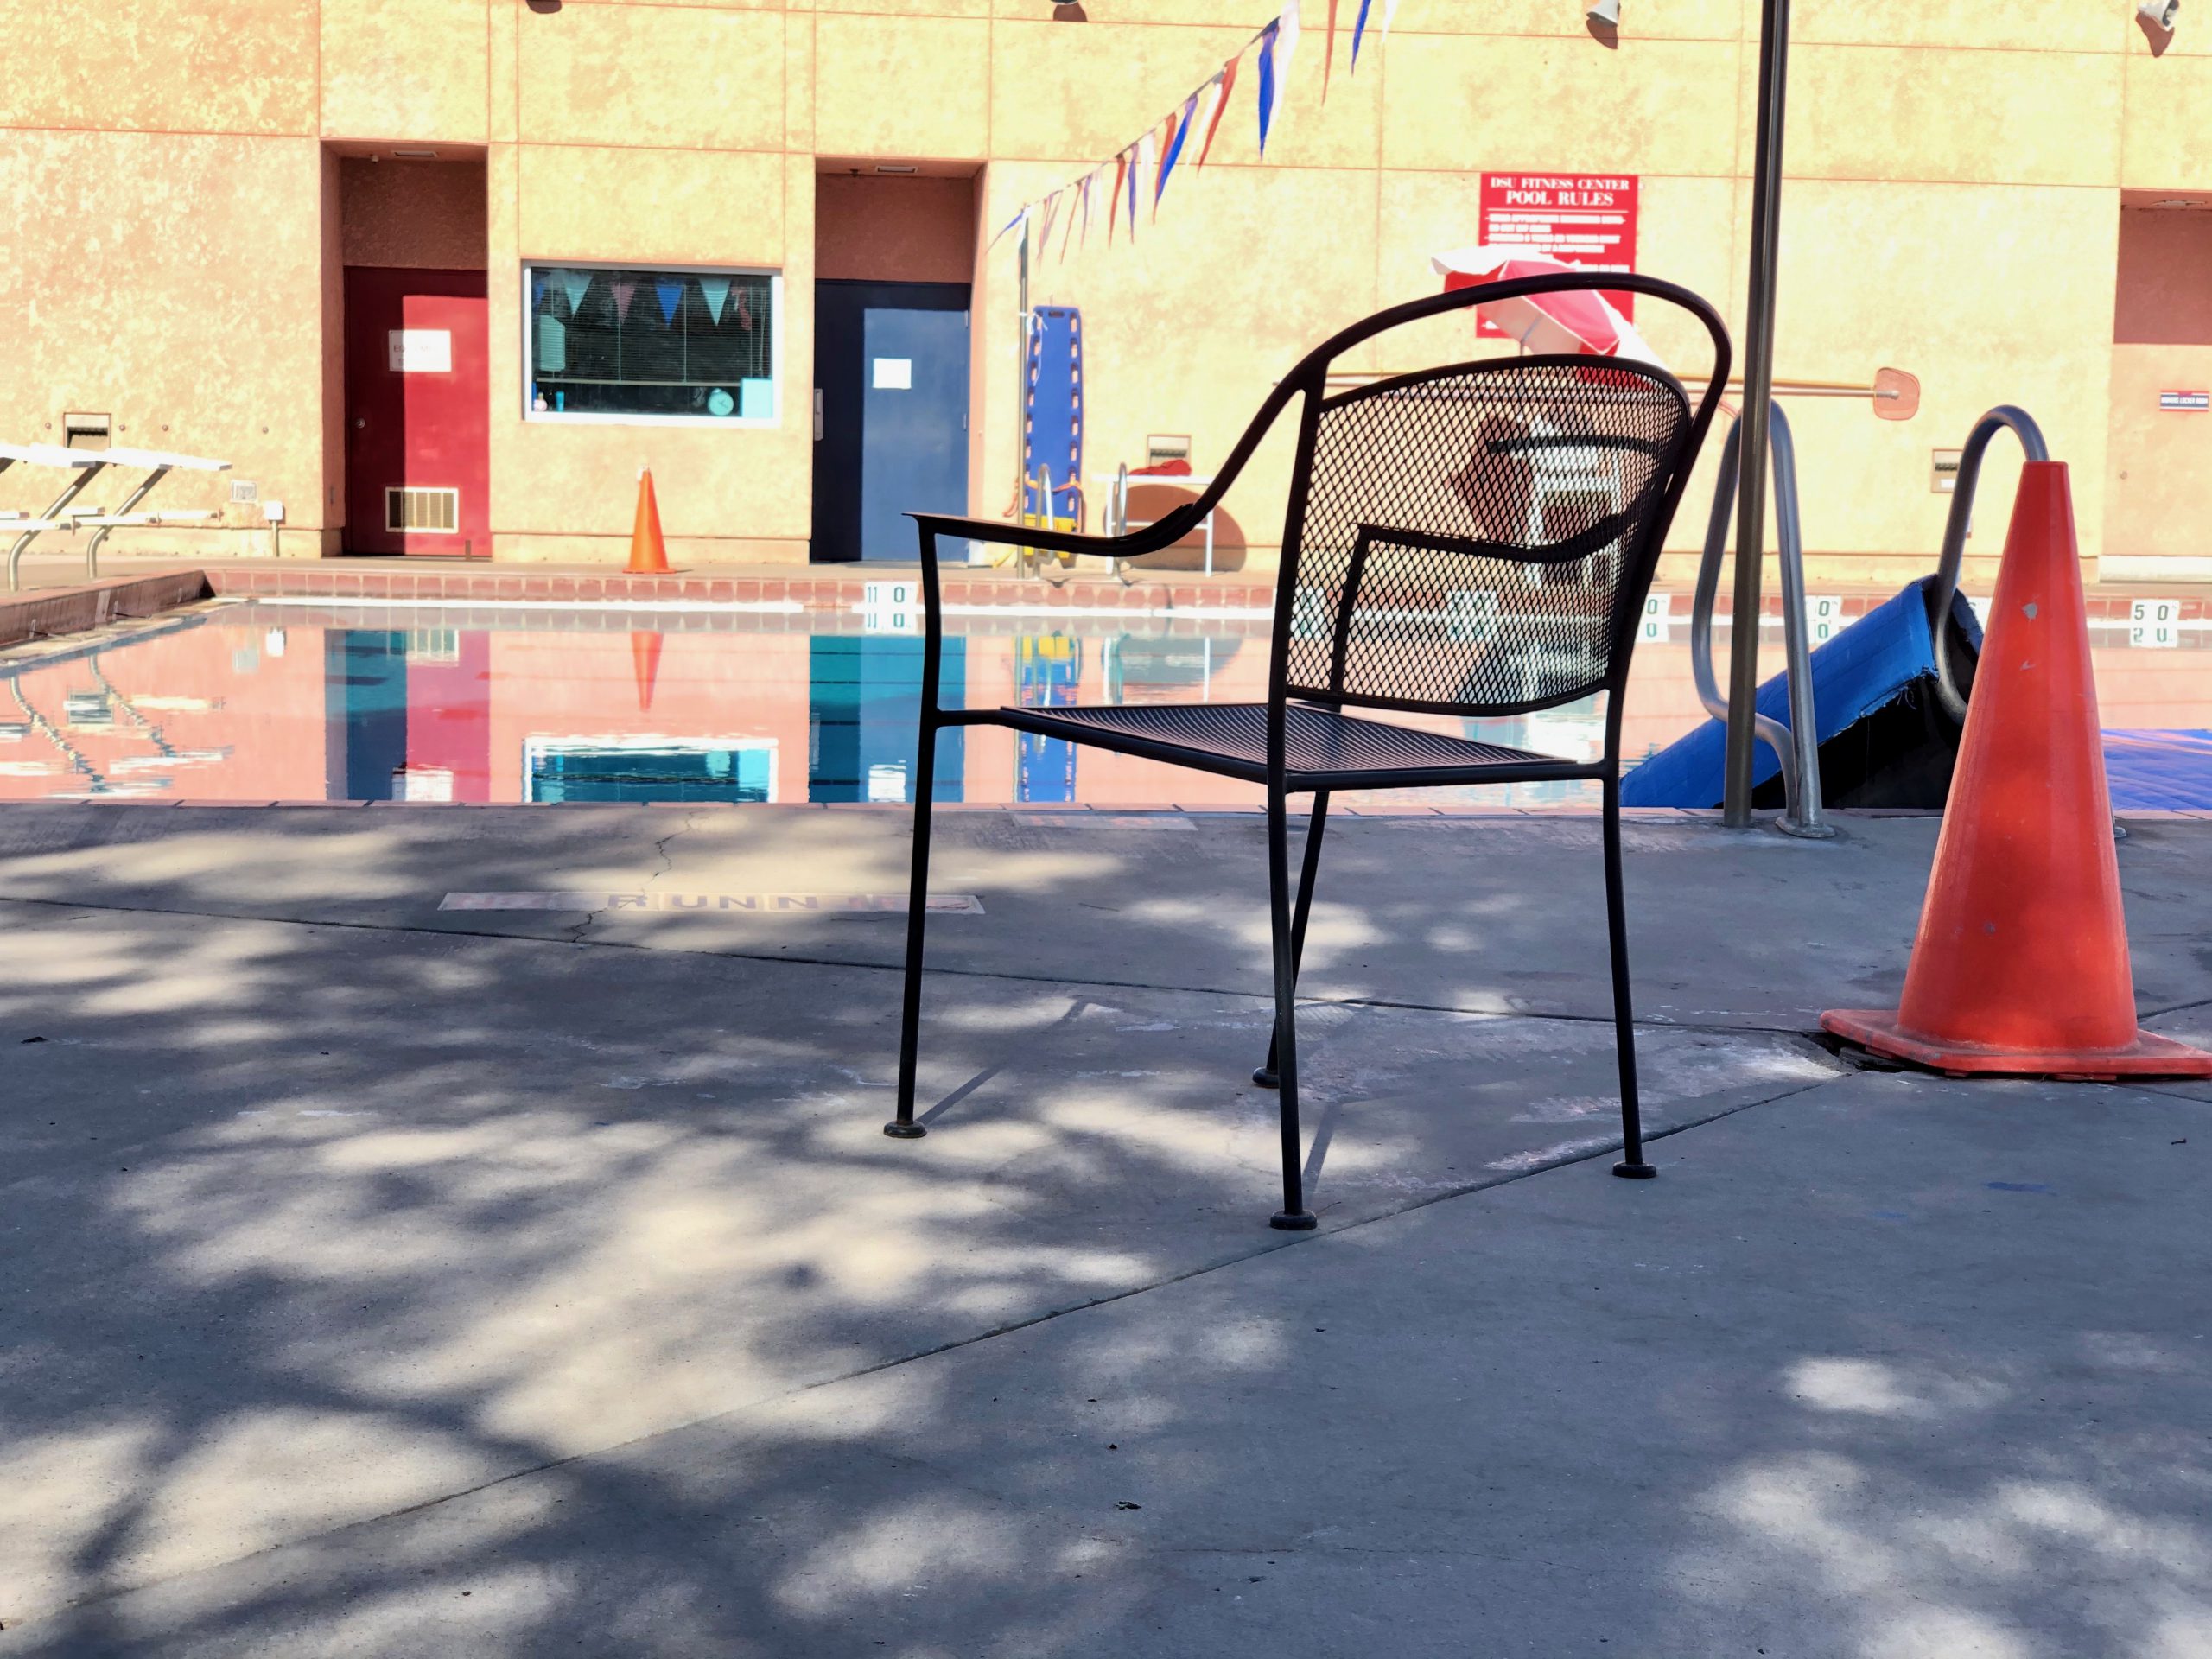 Eccles Fitness Center pool to close, marks end of an era